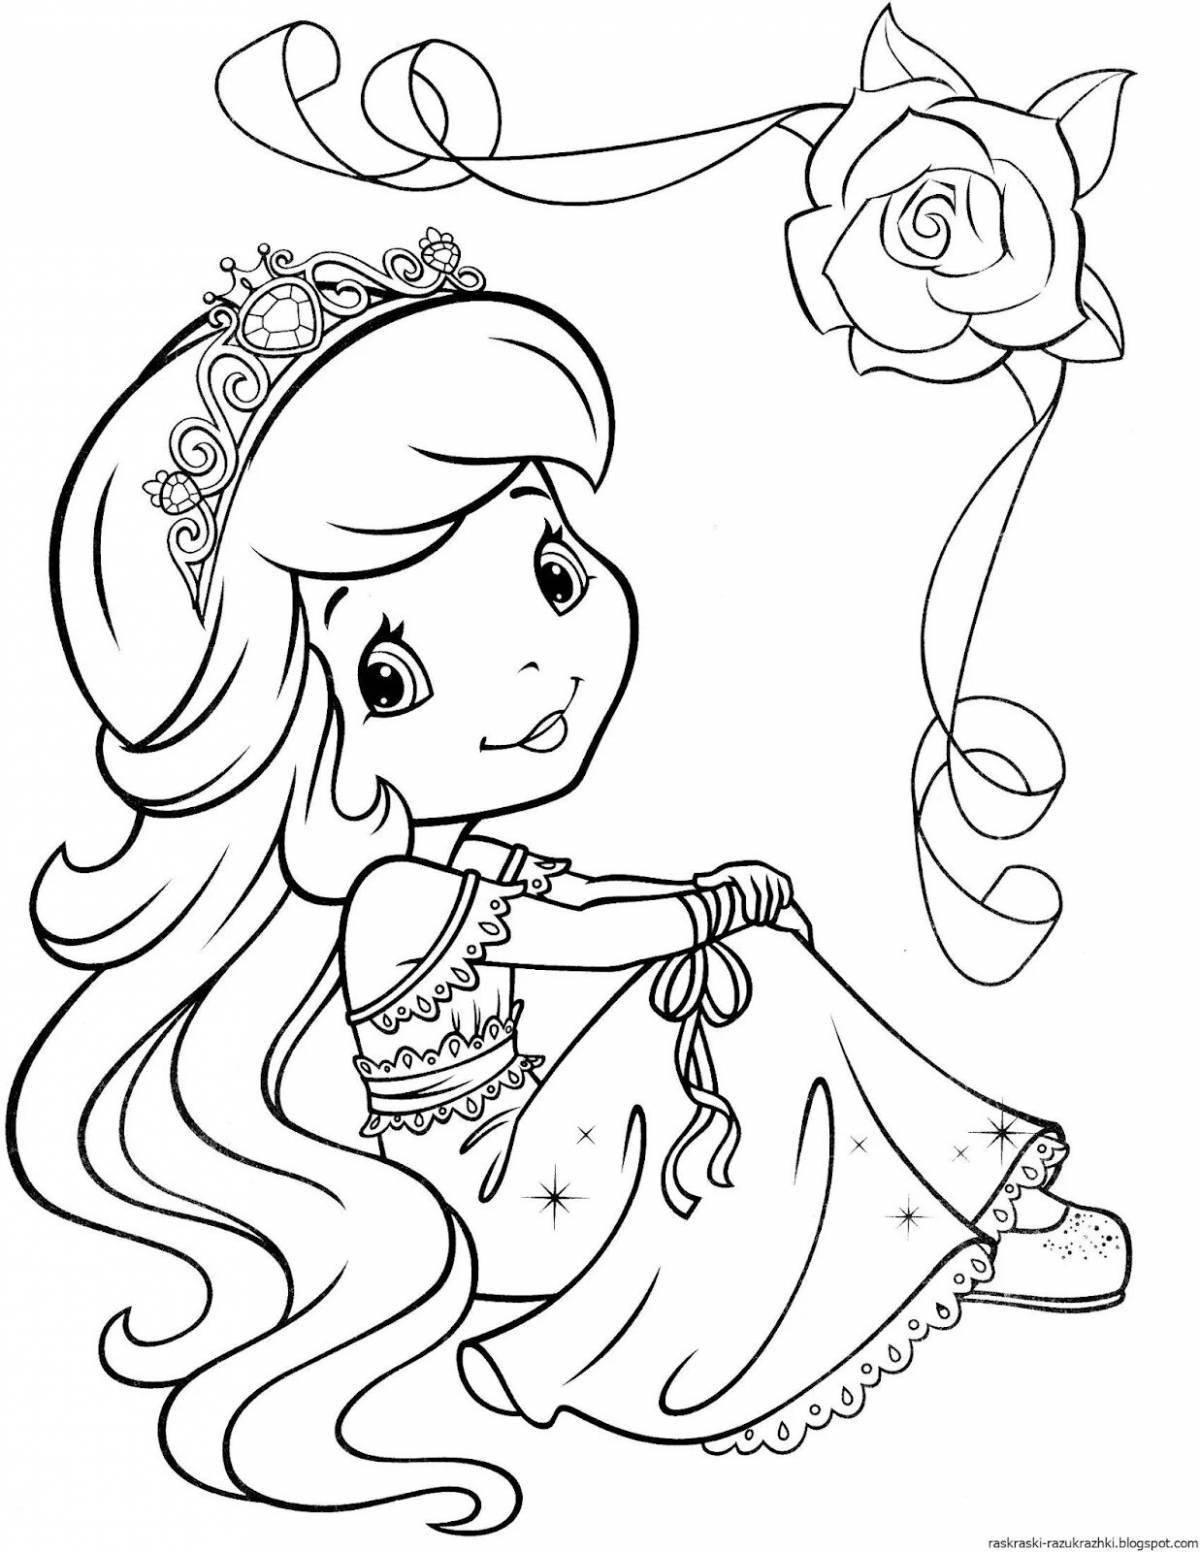 Cute coloring book for girls 6-7 years old